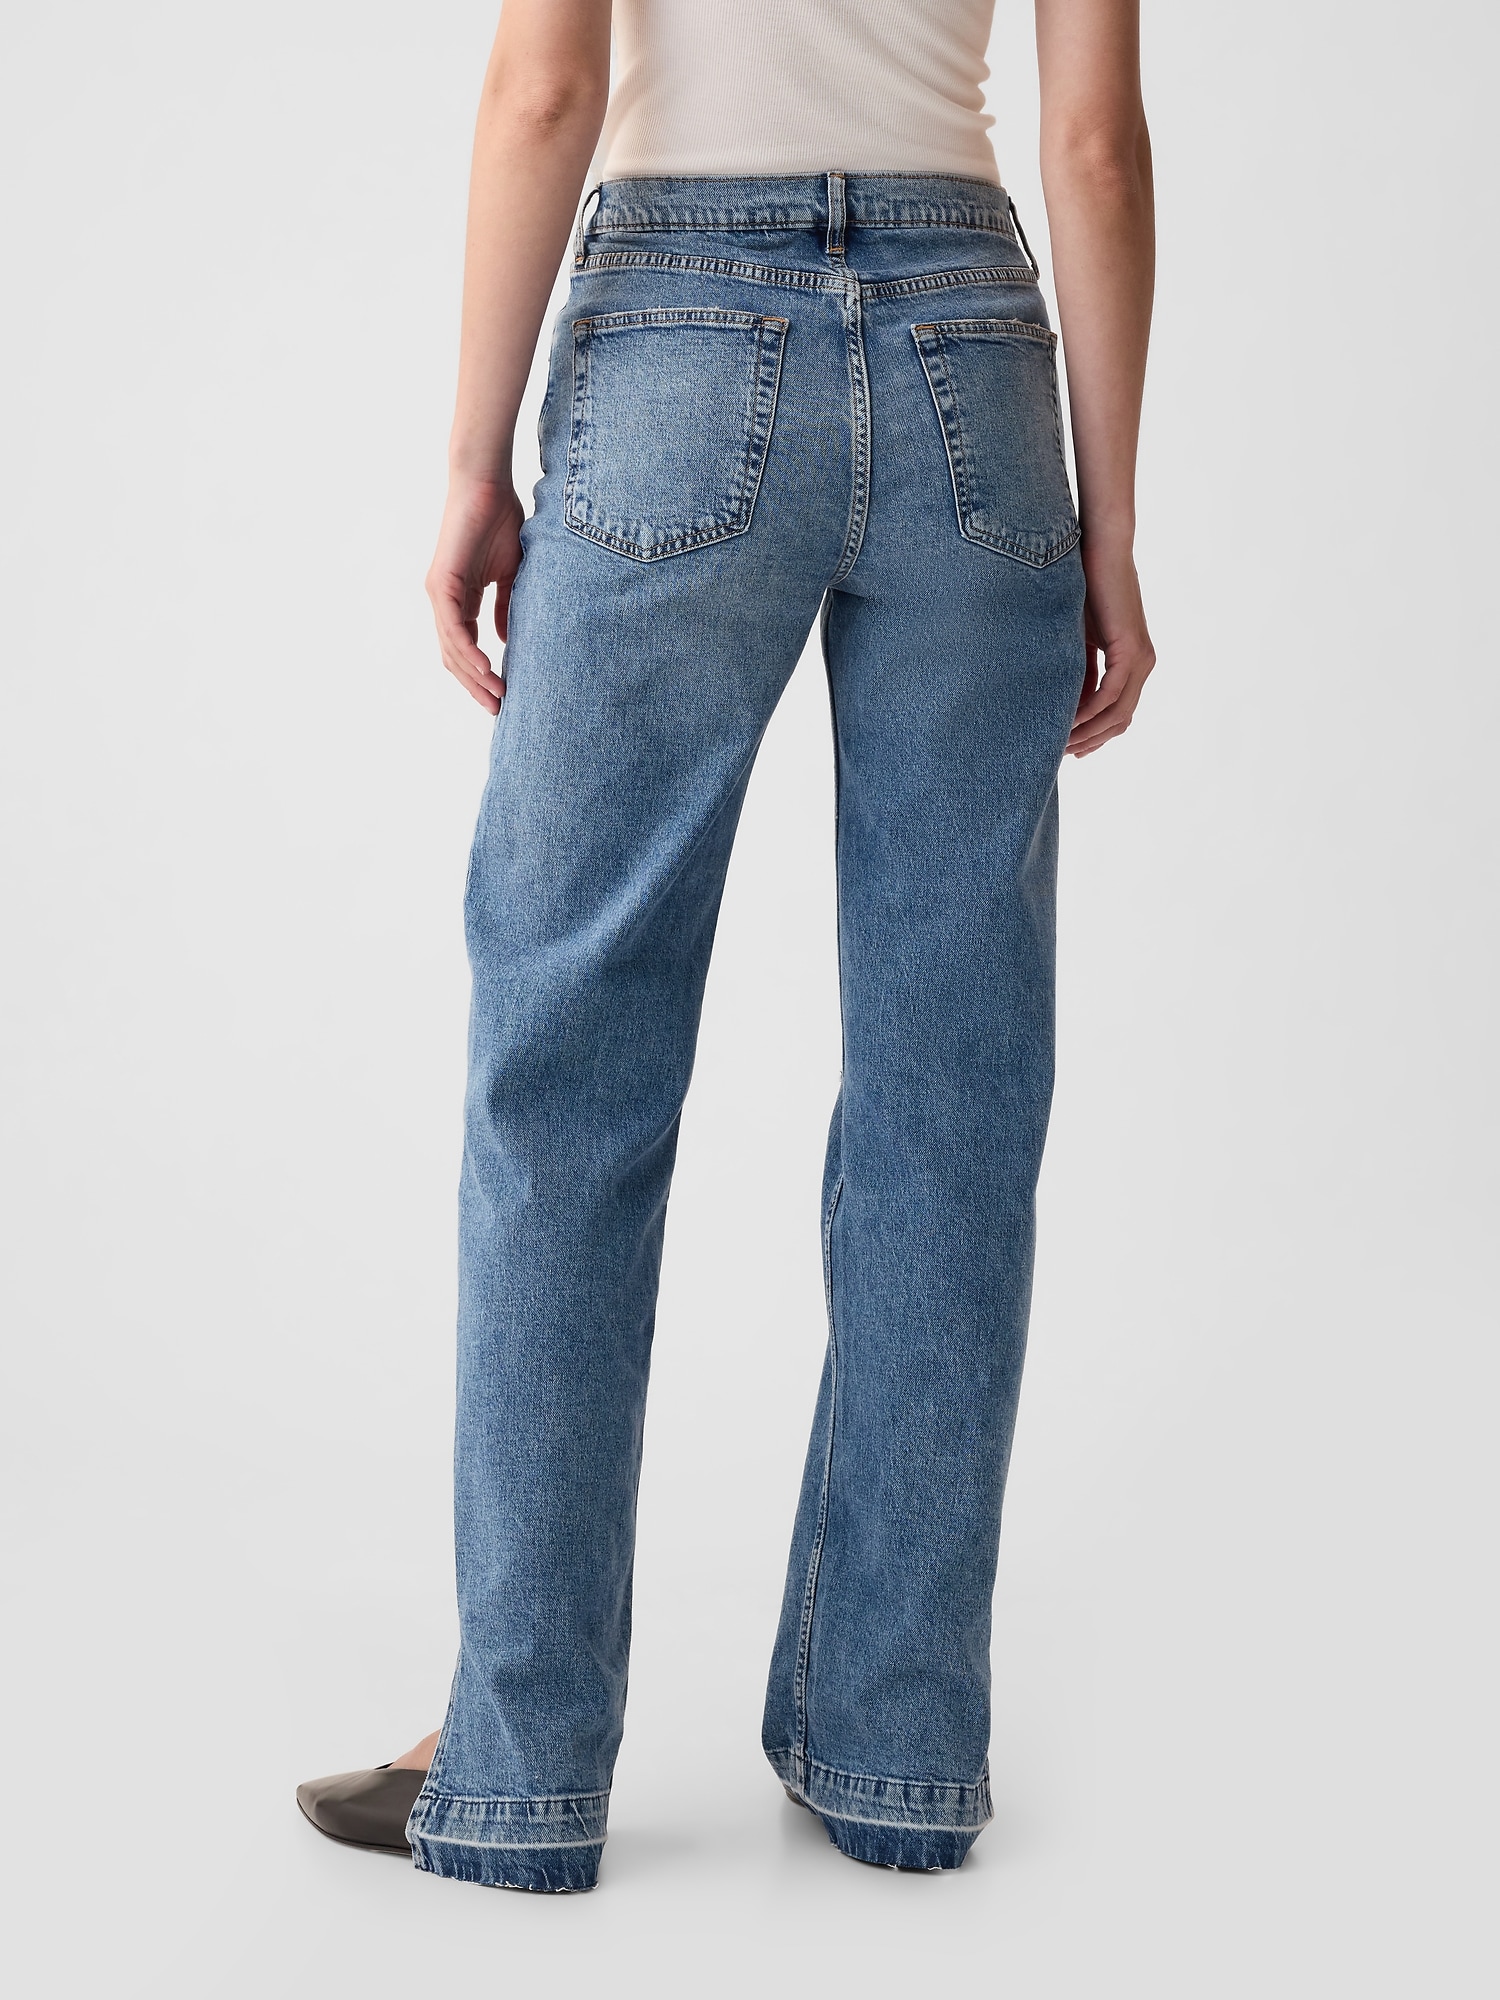 Straight Fit Jeans in Mid blue - Women, Cotton